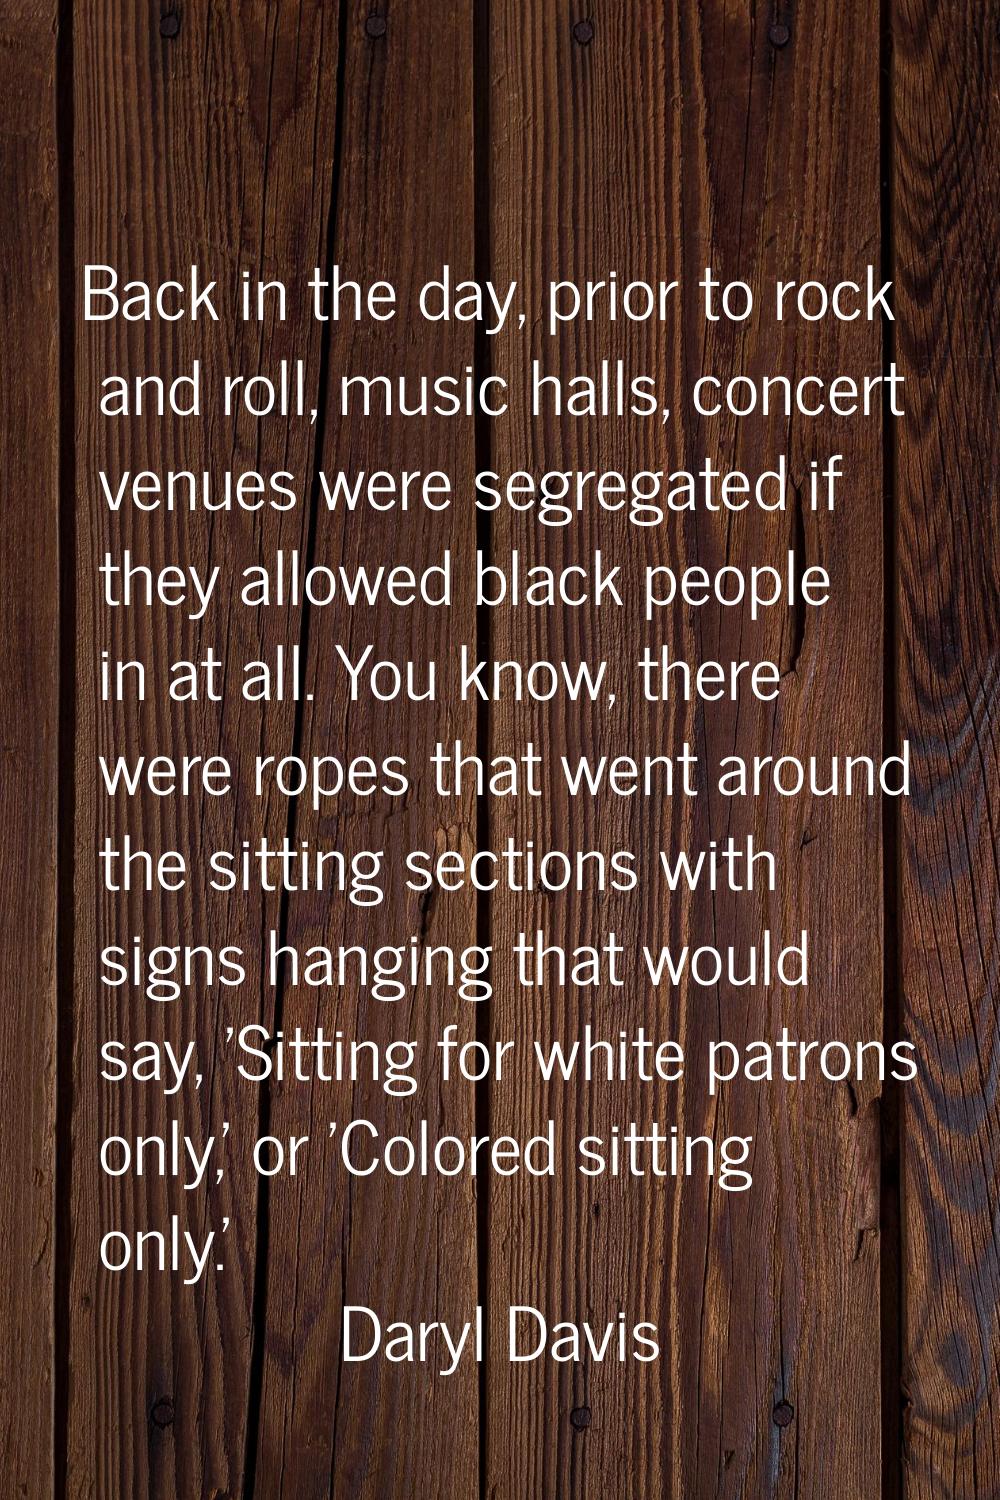 Back in the day, prior to rock and roll, music halls, concert venues were segregated if they allowe